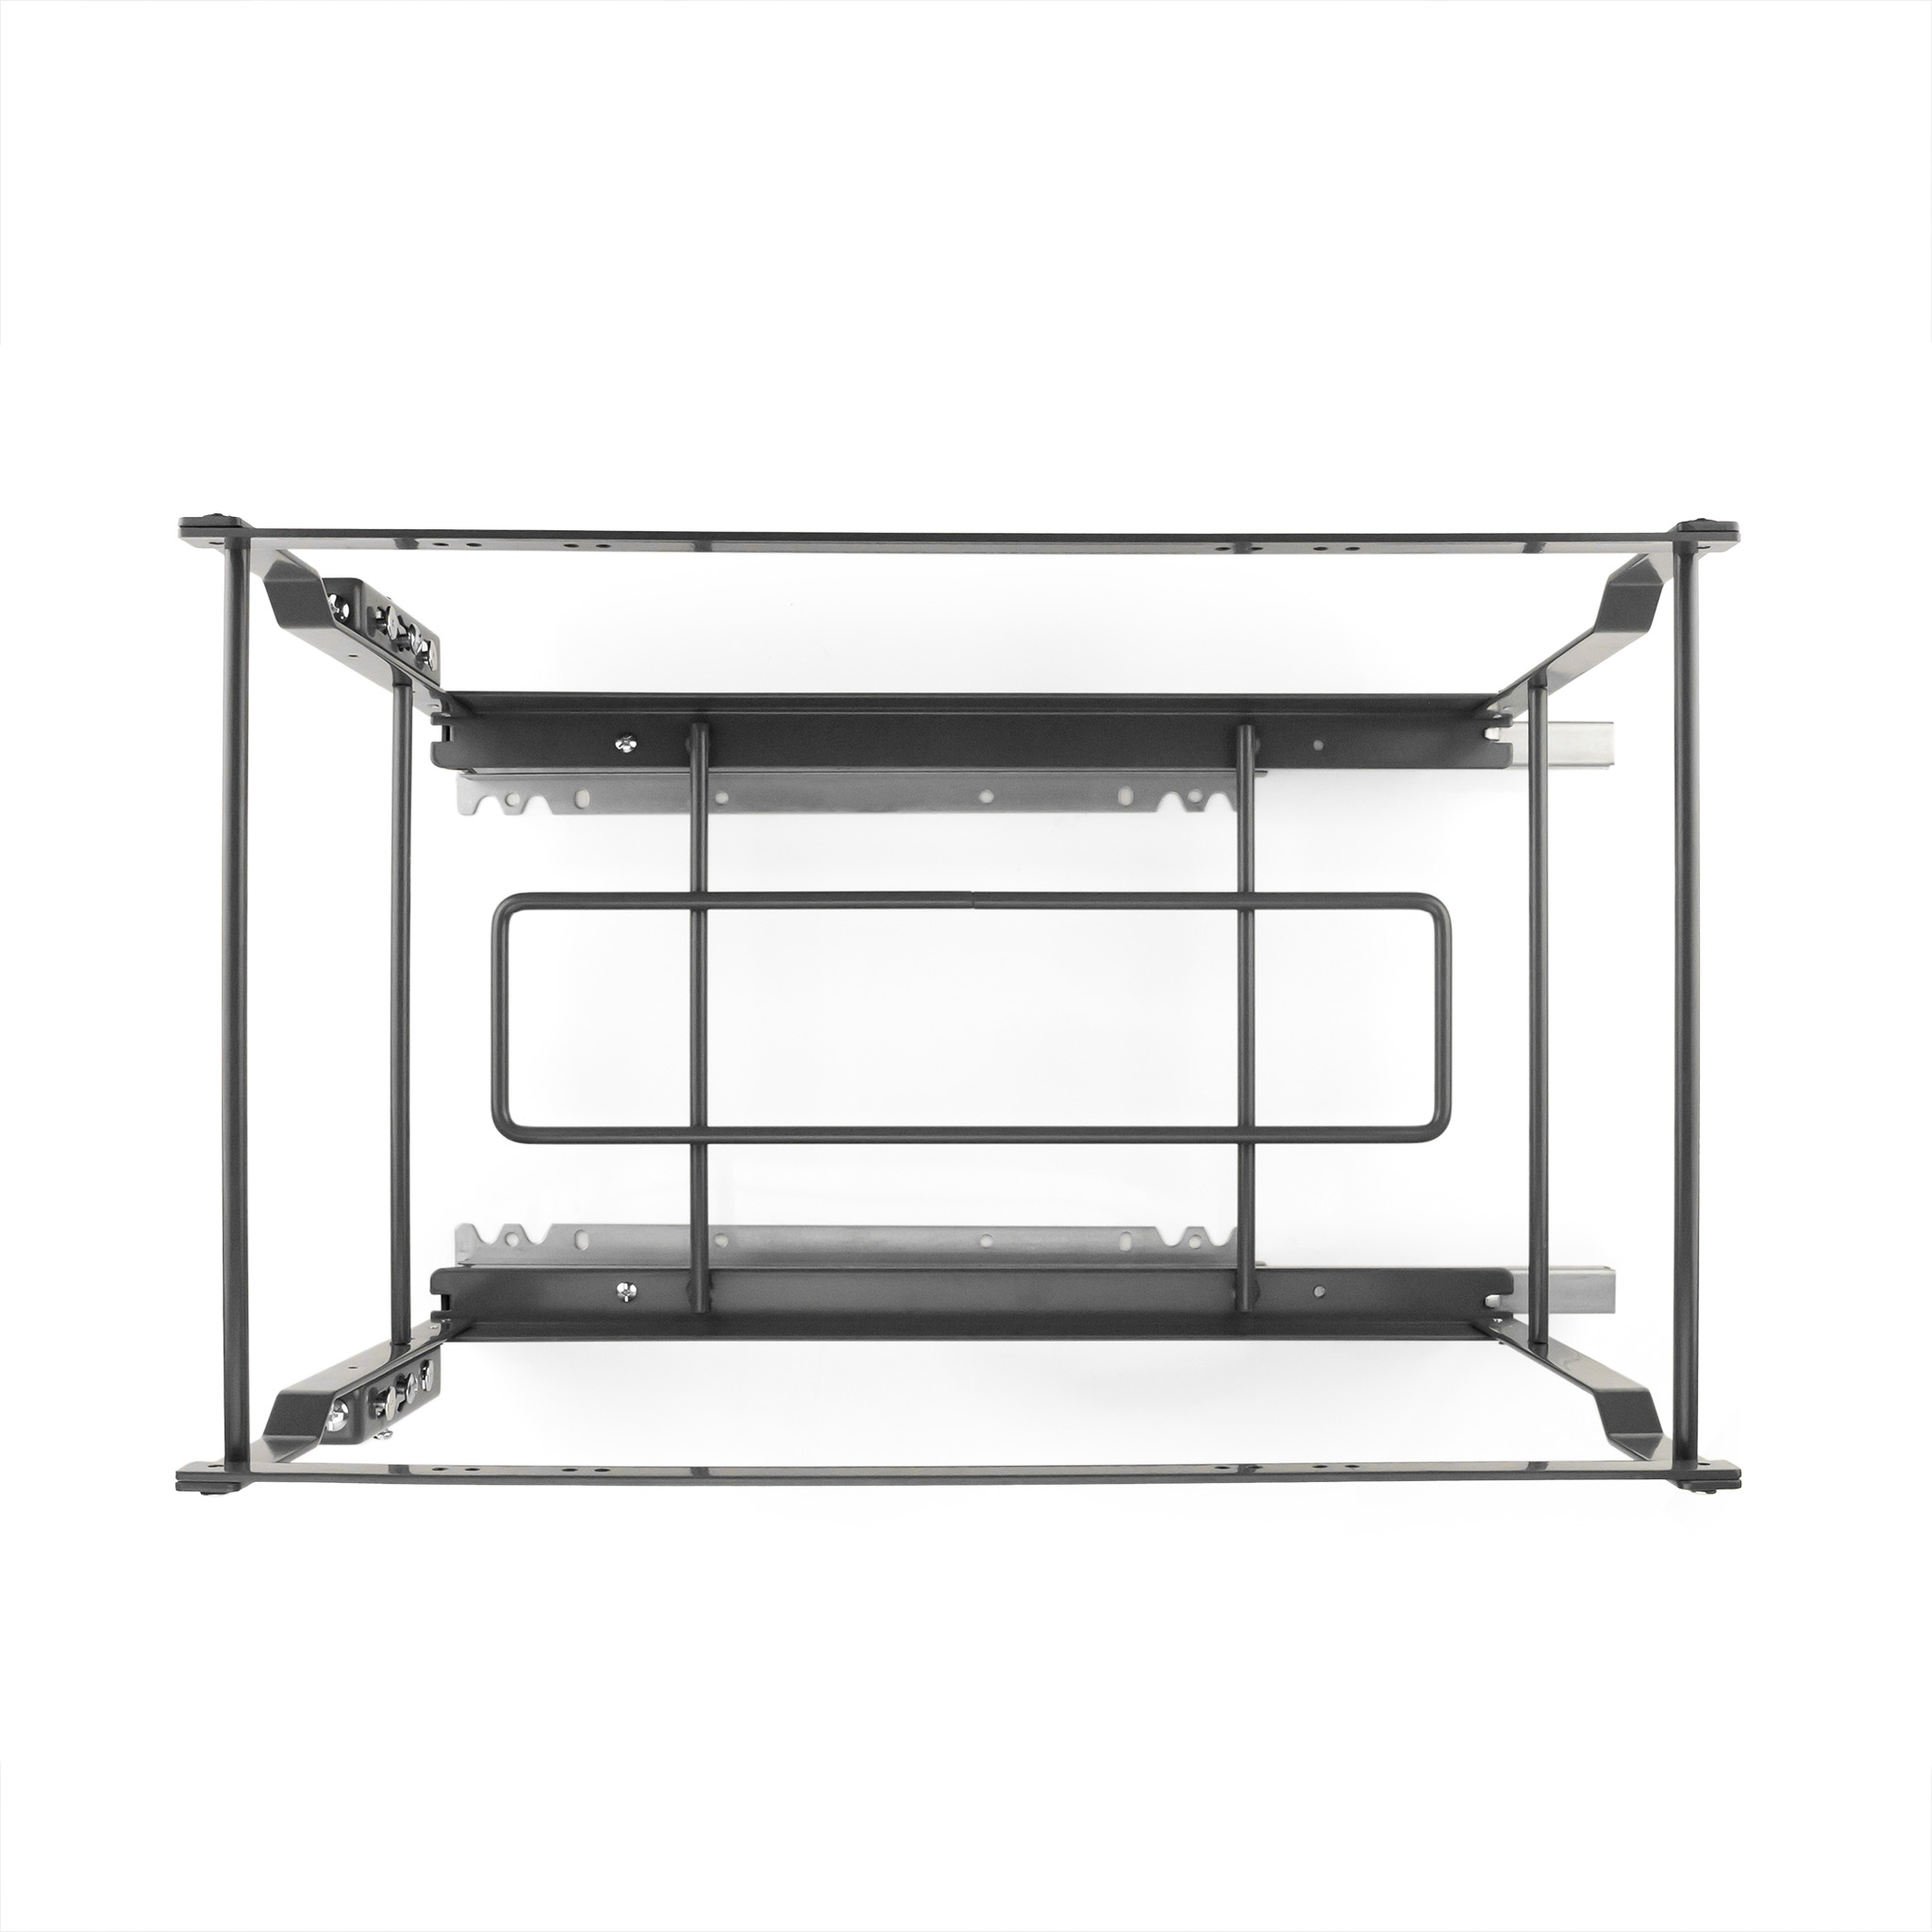 M-Series SpaceBin Frame, 15in, Anthracite